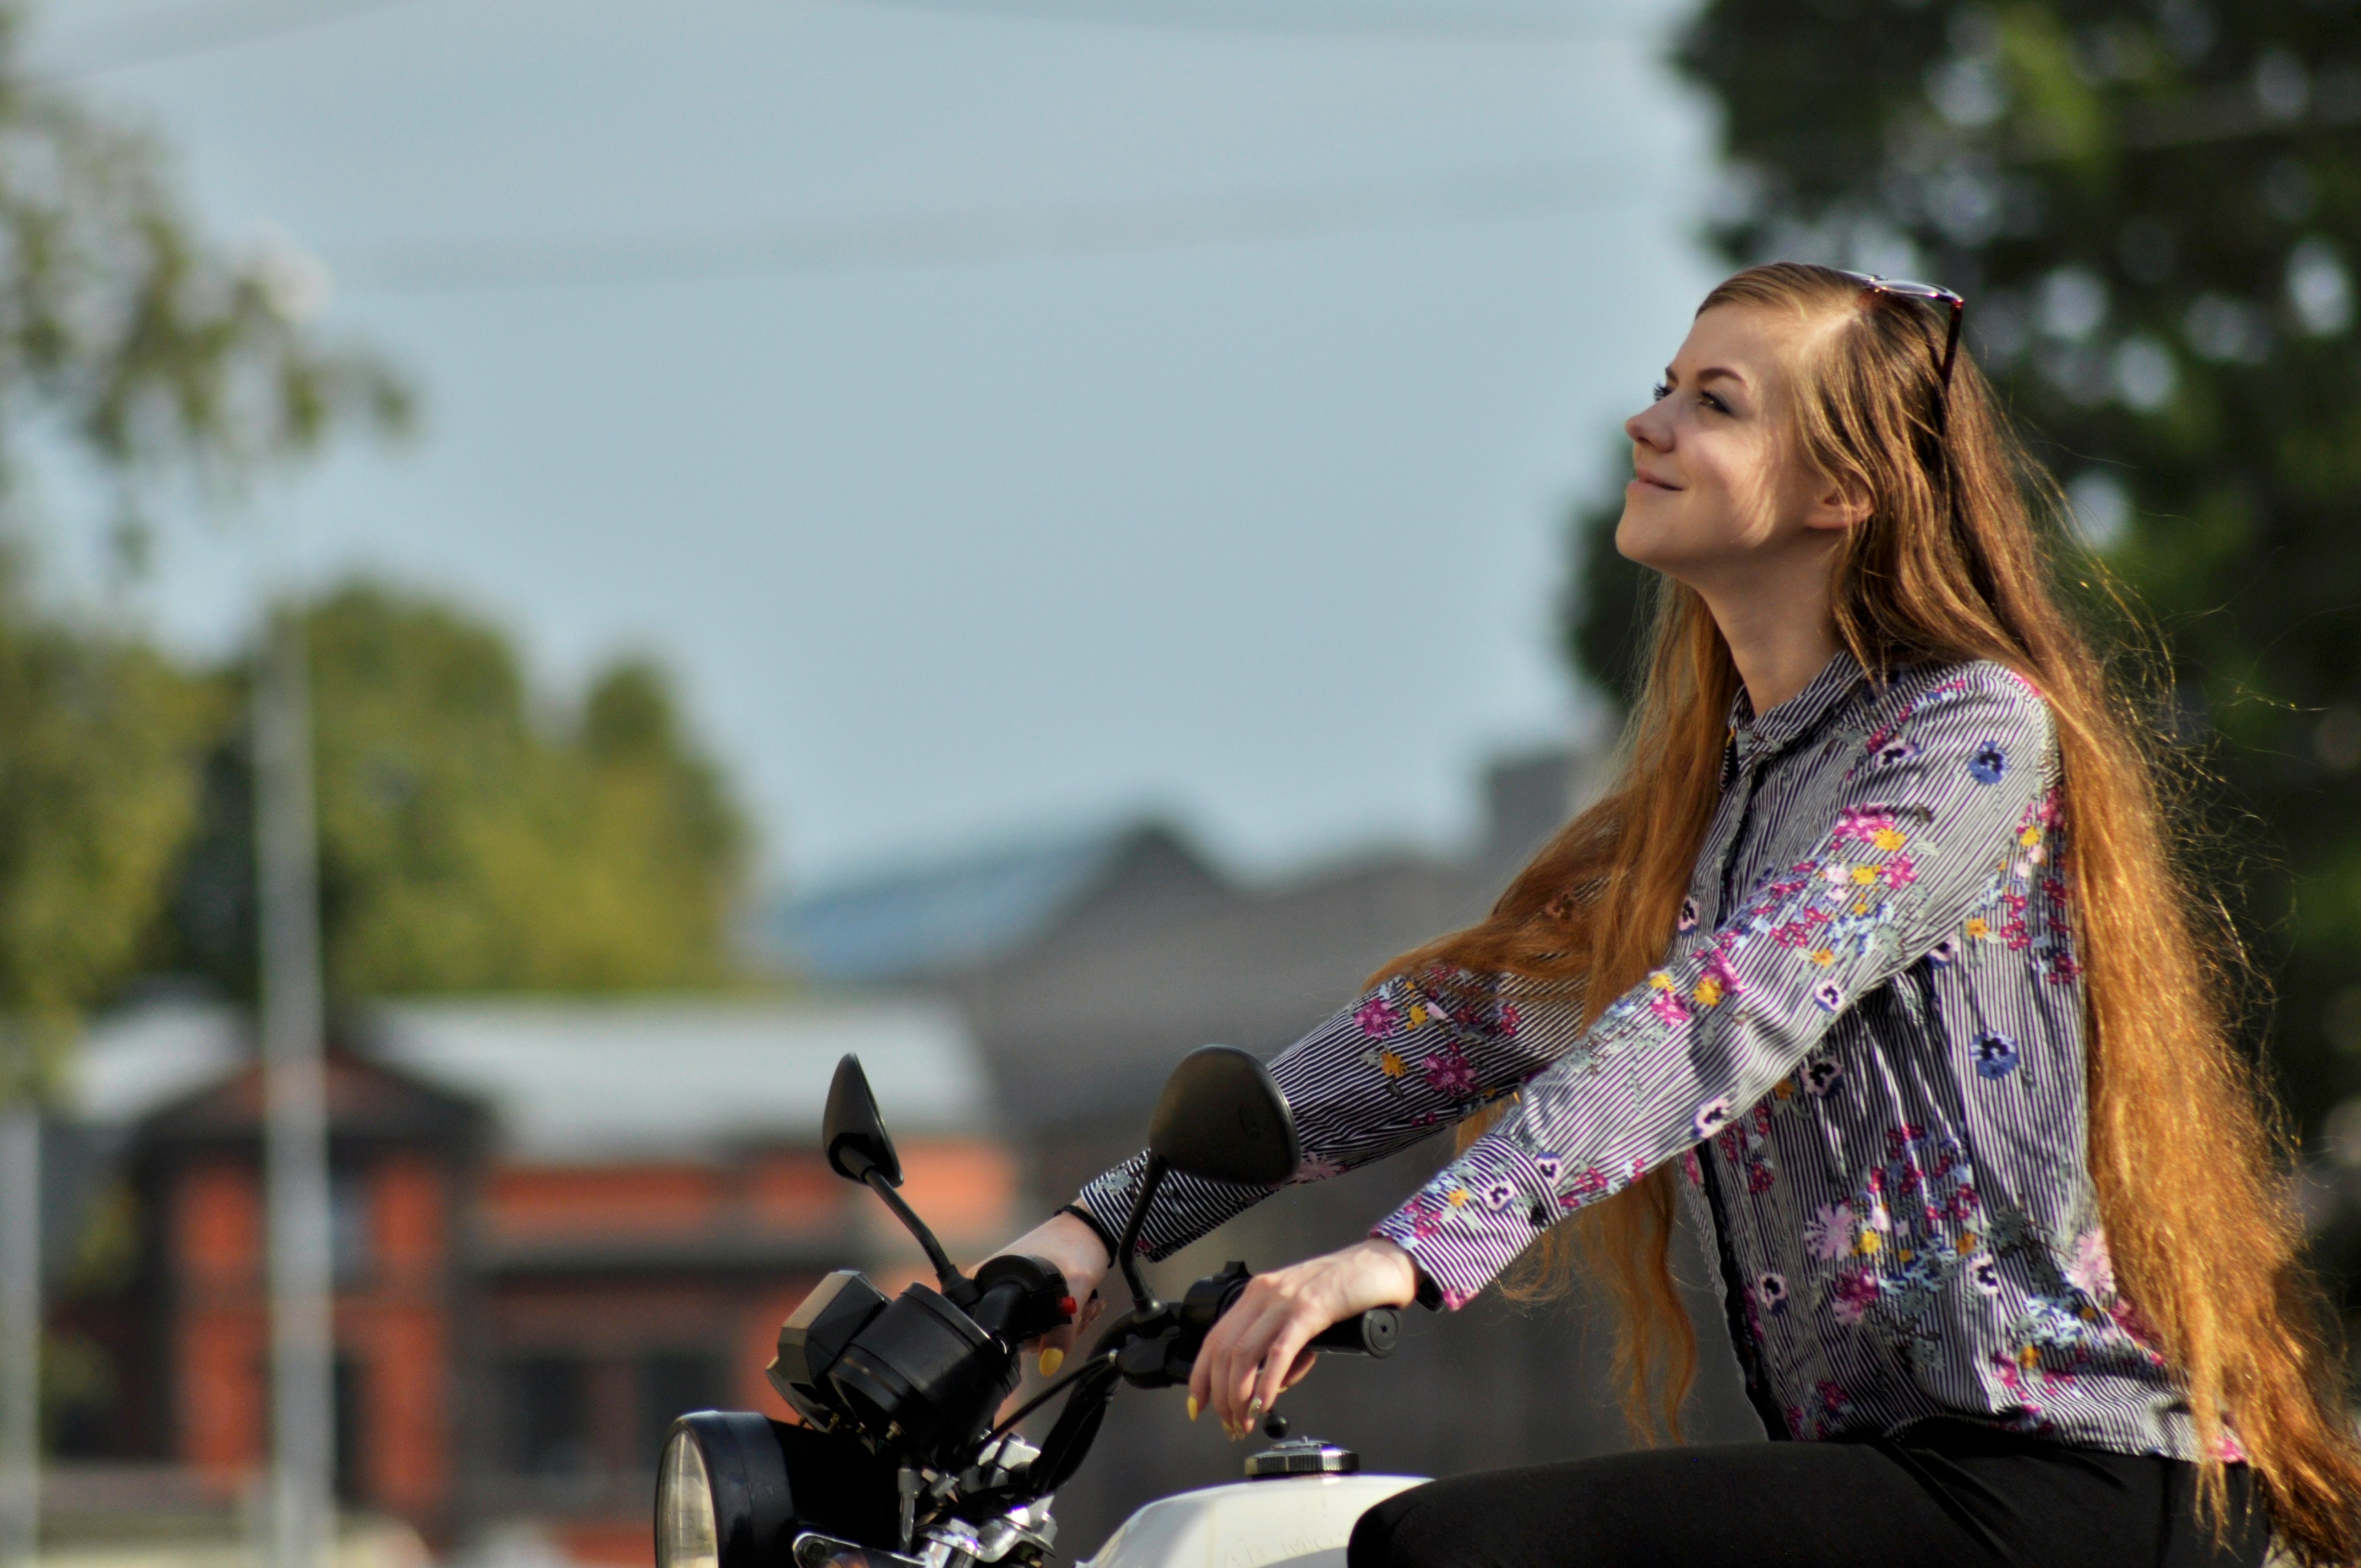 woman wearing purple floral long-sleeved top riding motorcycle